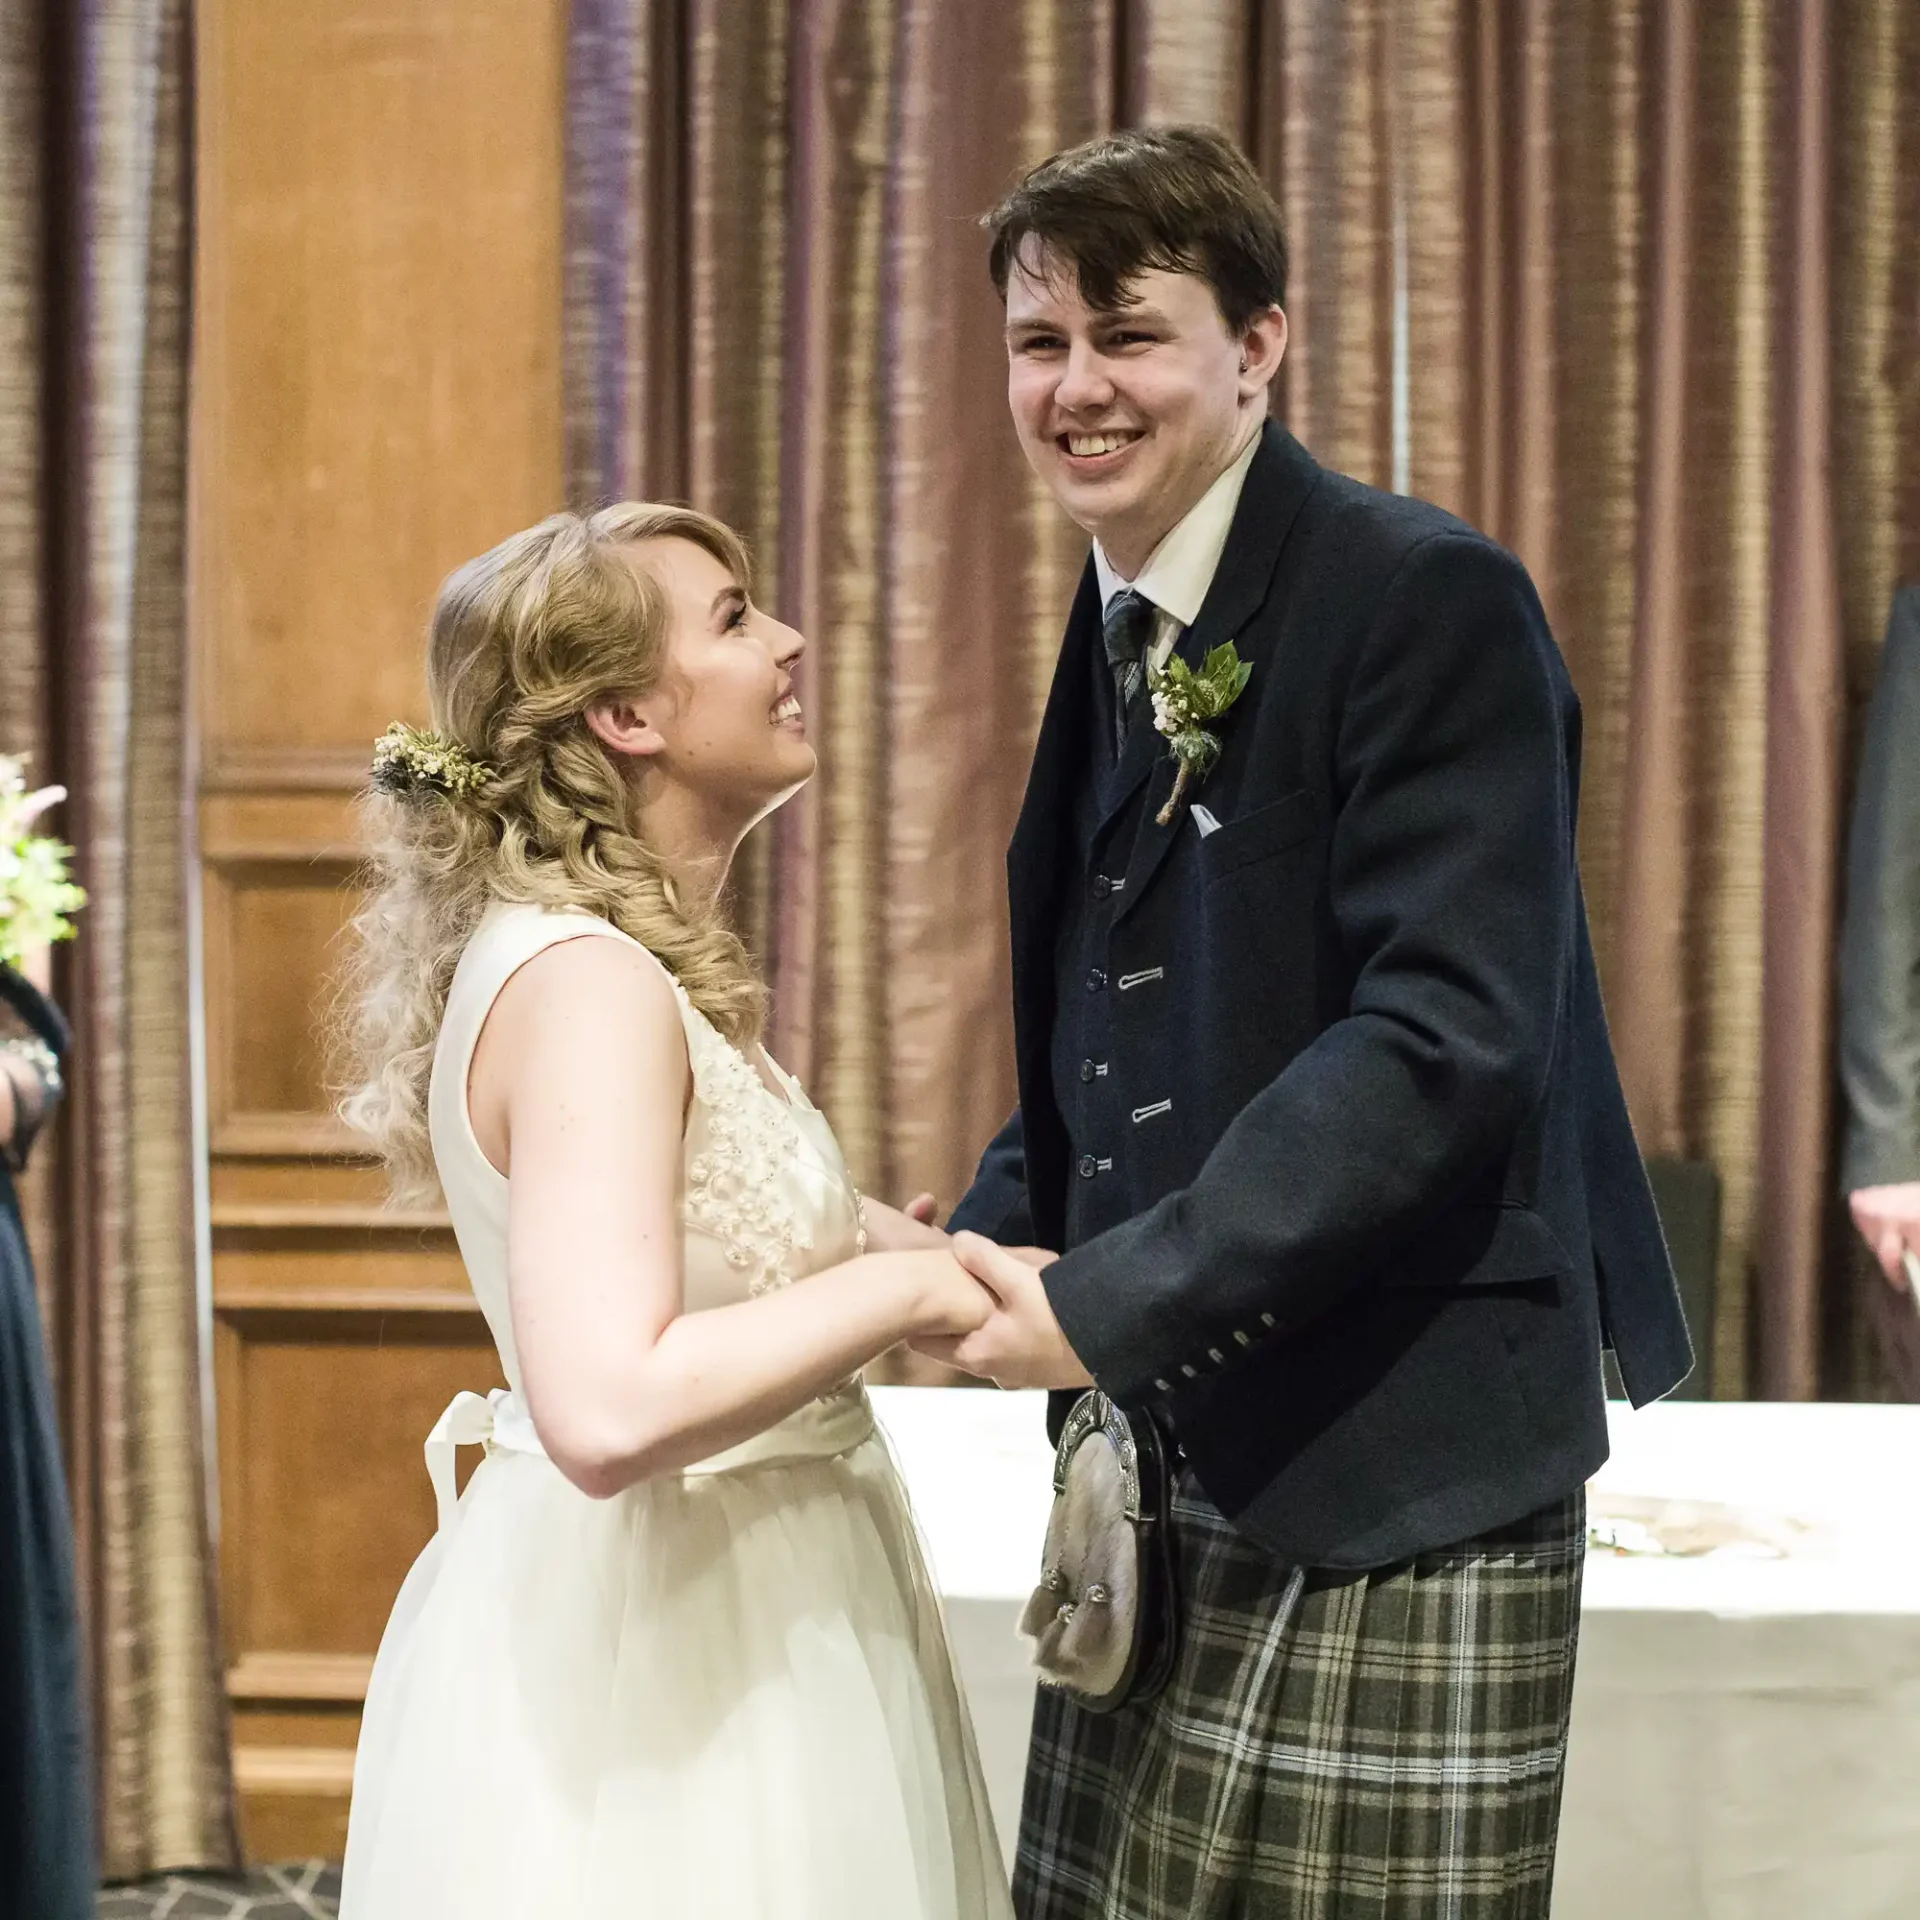 A bride and groom smiling at each other in a ceremonial hall, the groom in a kilt and the bride in a white dress with floral accessories in her hair.